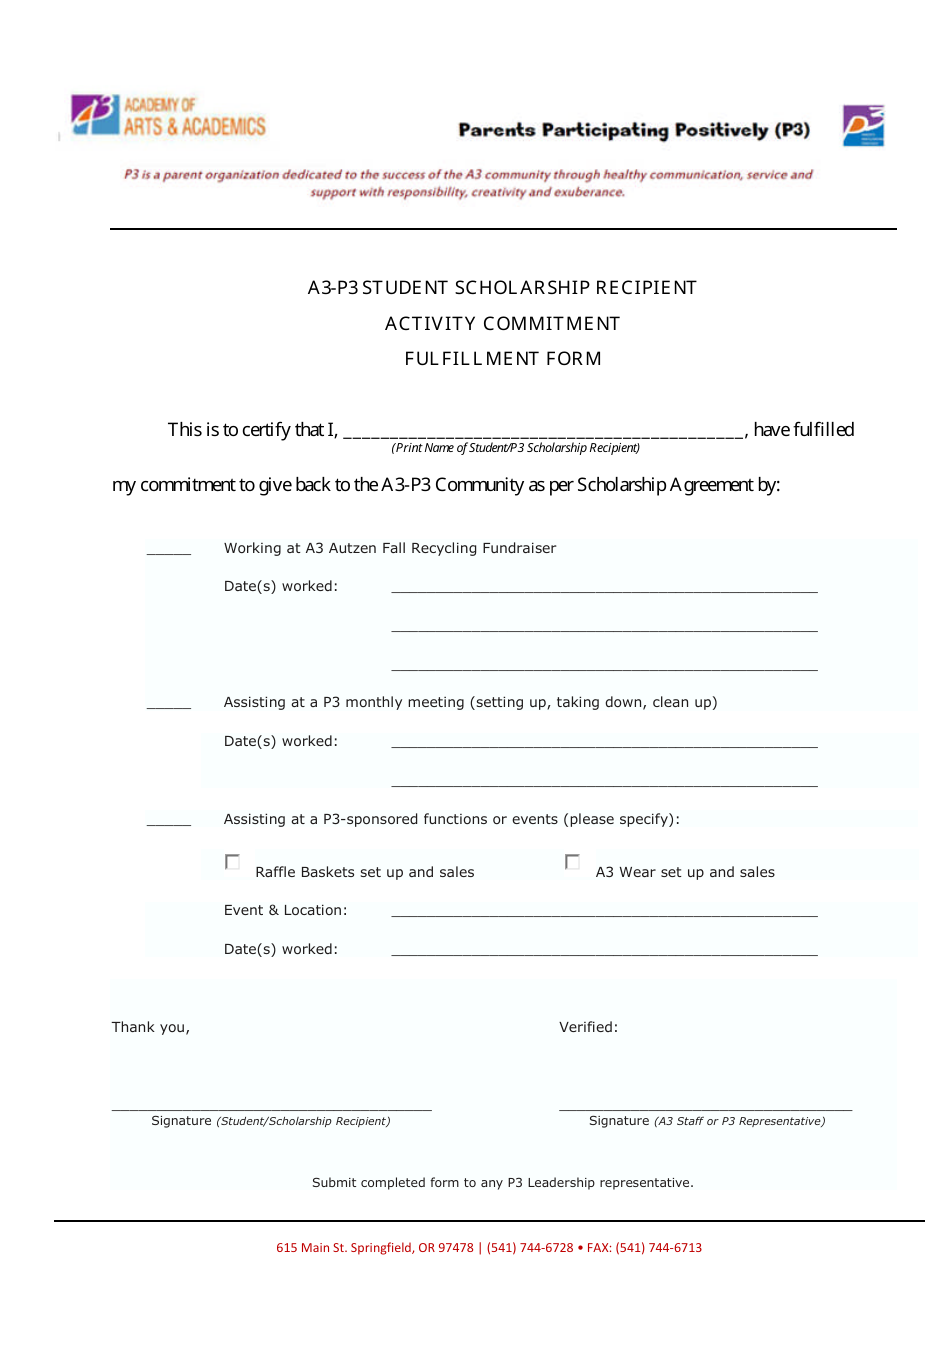 Student Scholarship Recipient Activity Commitment Fulfillment Form - Academy of Arts and Academics, Page 1